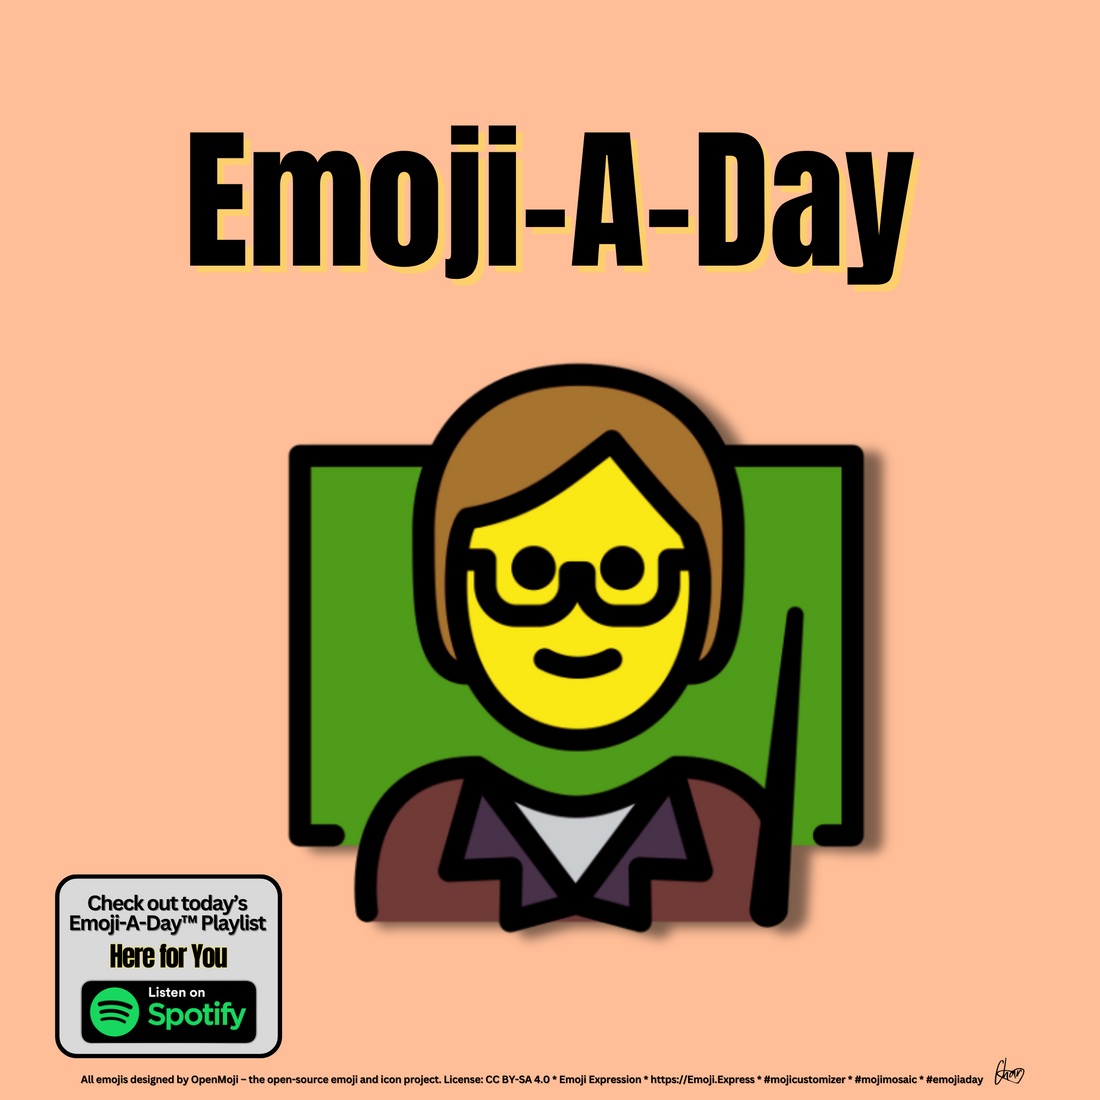 Emoij-A-Day theme with Teacher emoji and Here for You Spotify Playlist